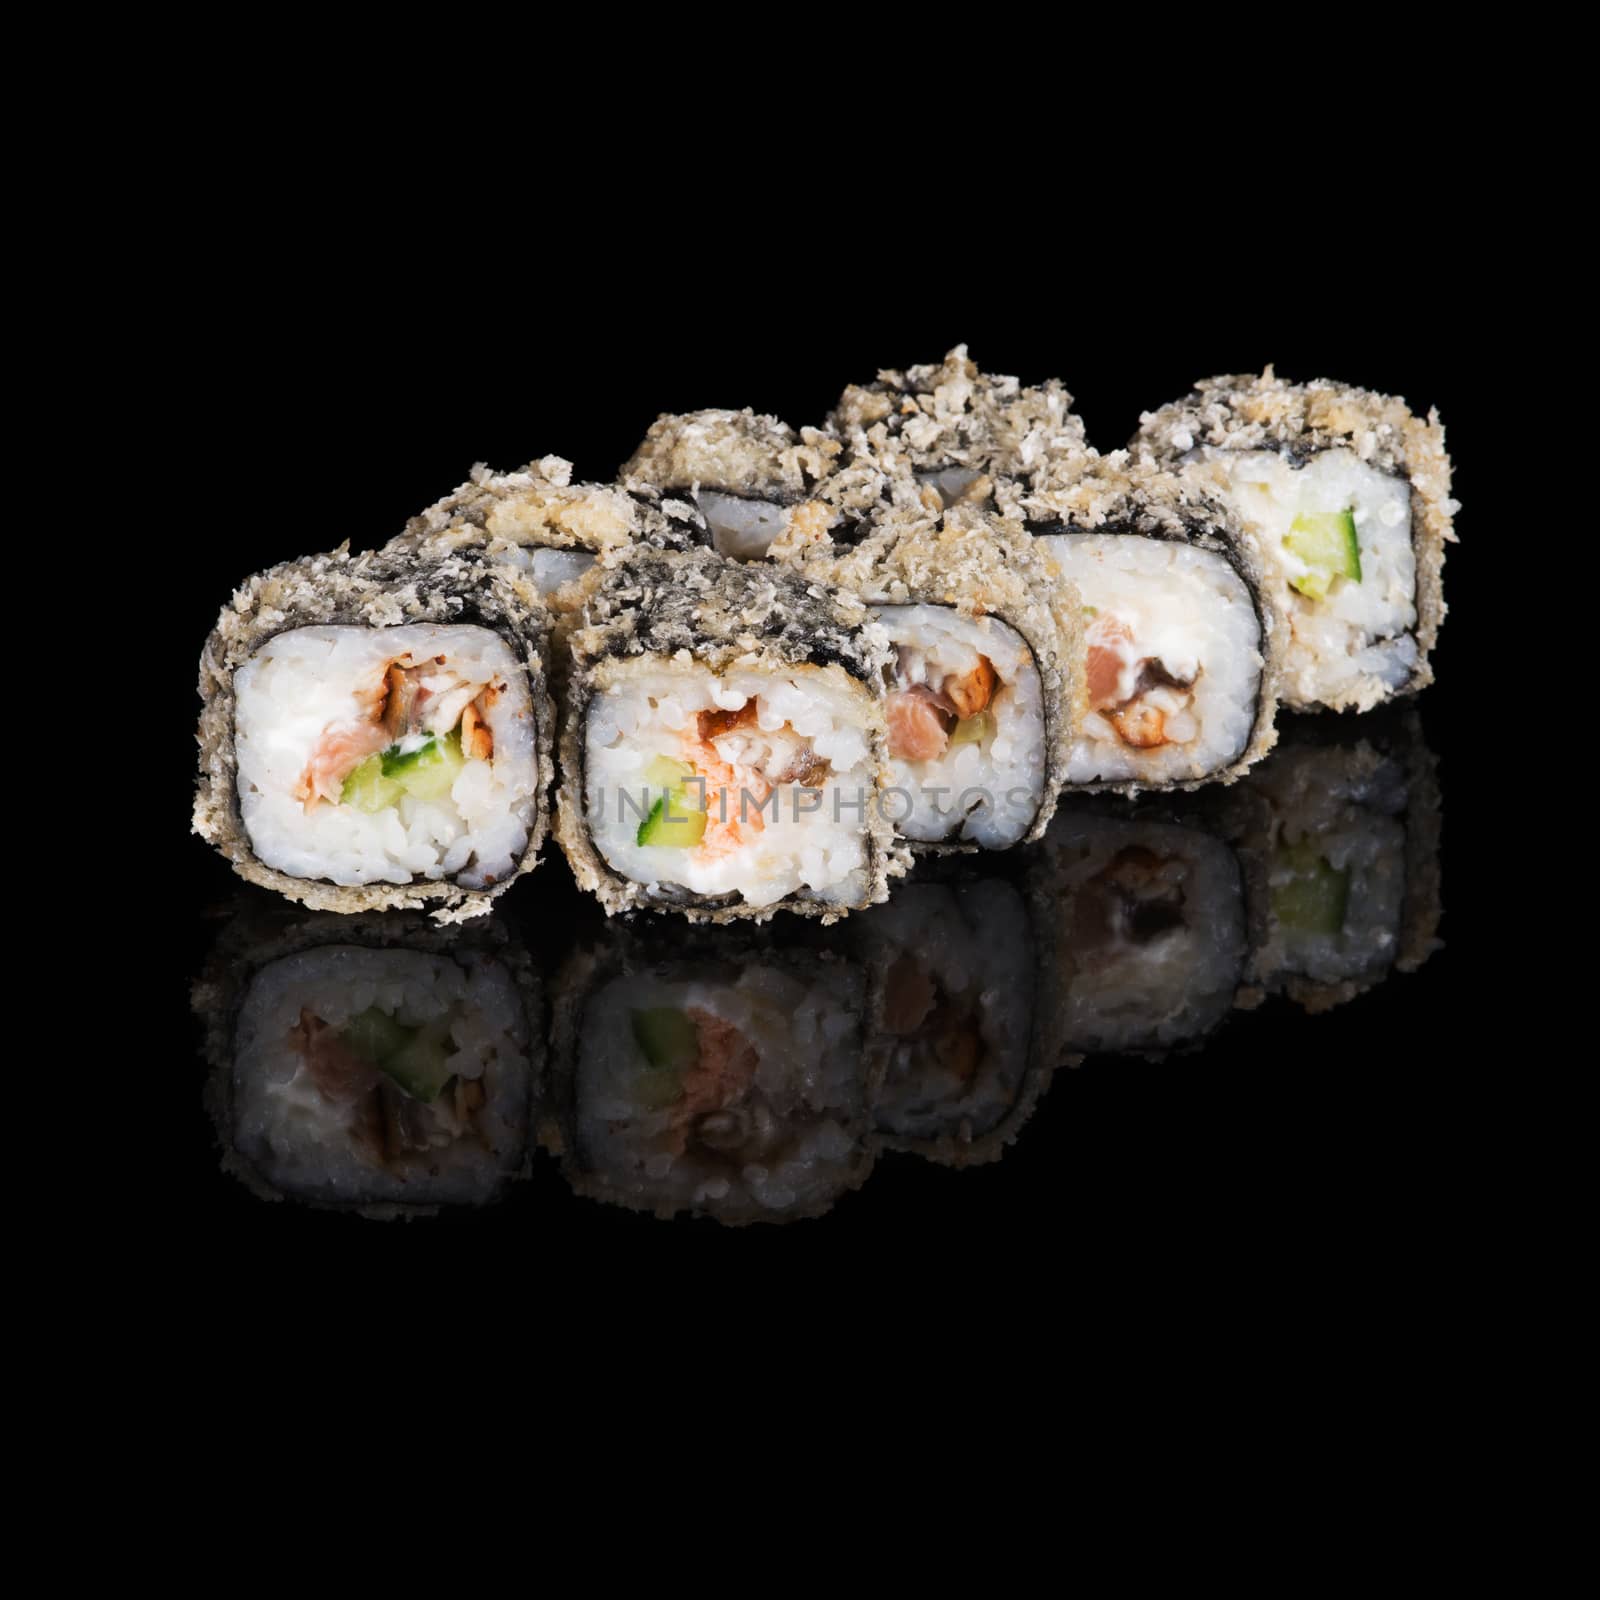 Grilled sushi rolls with salmon and eel on black background